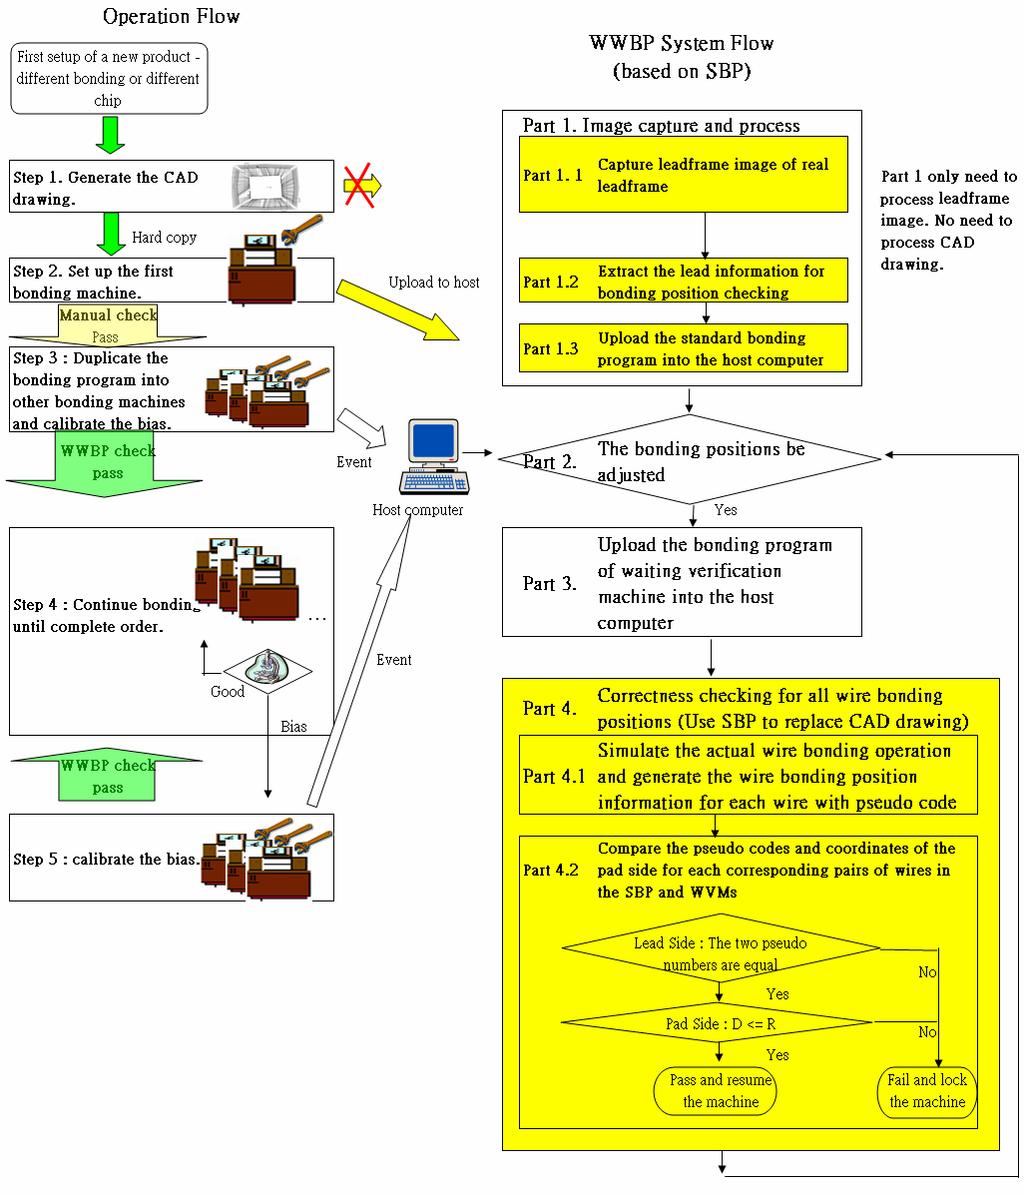 Figure 16. Flow chart of the proposed wrong wire bonding prevention system based on SBP. Part 1.